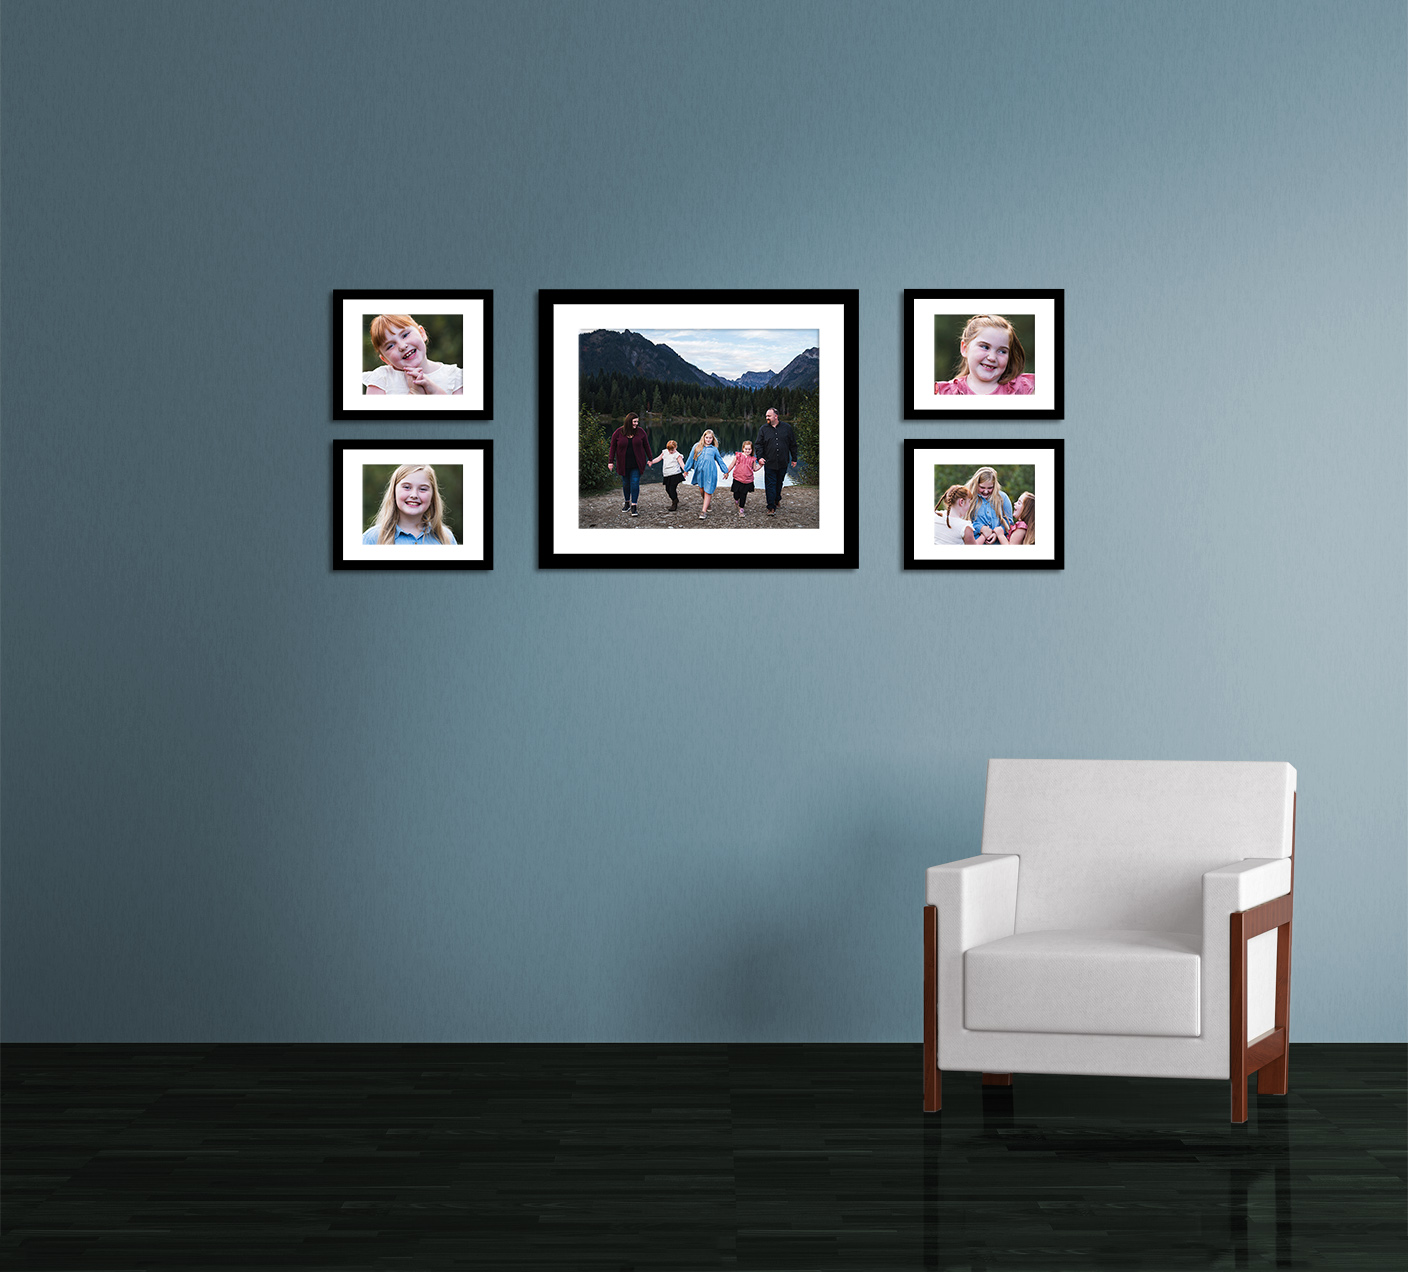 example of displaying family photos on the wall in frames